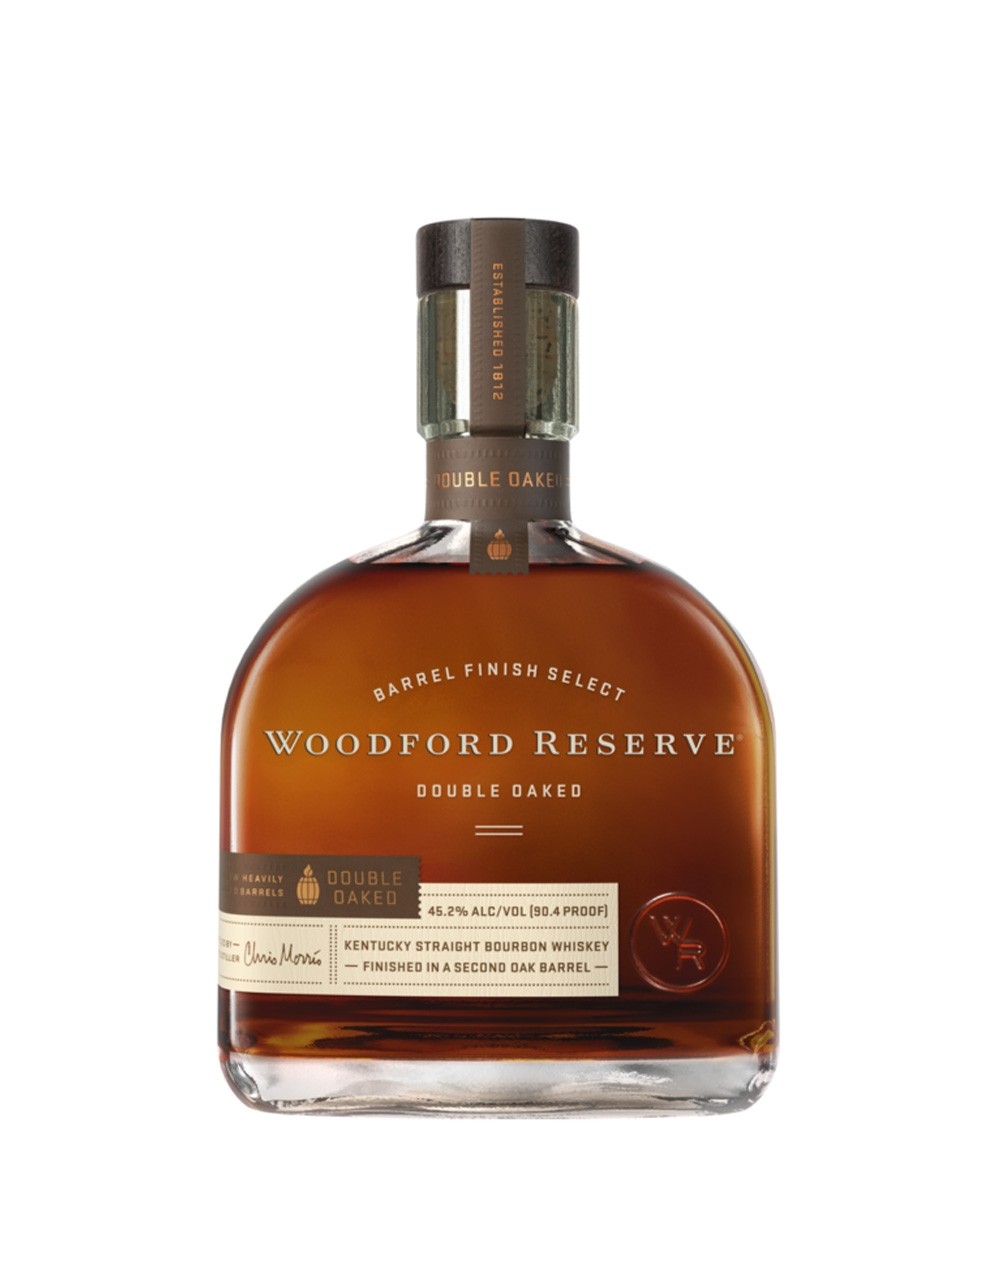 Woodford Reserve Double Oaked Bourbon | Buy Online or Send